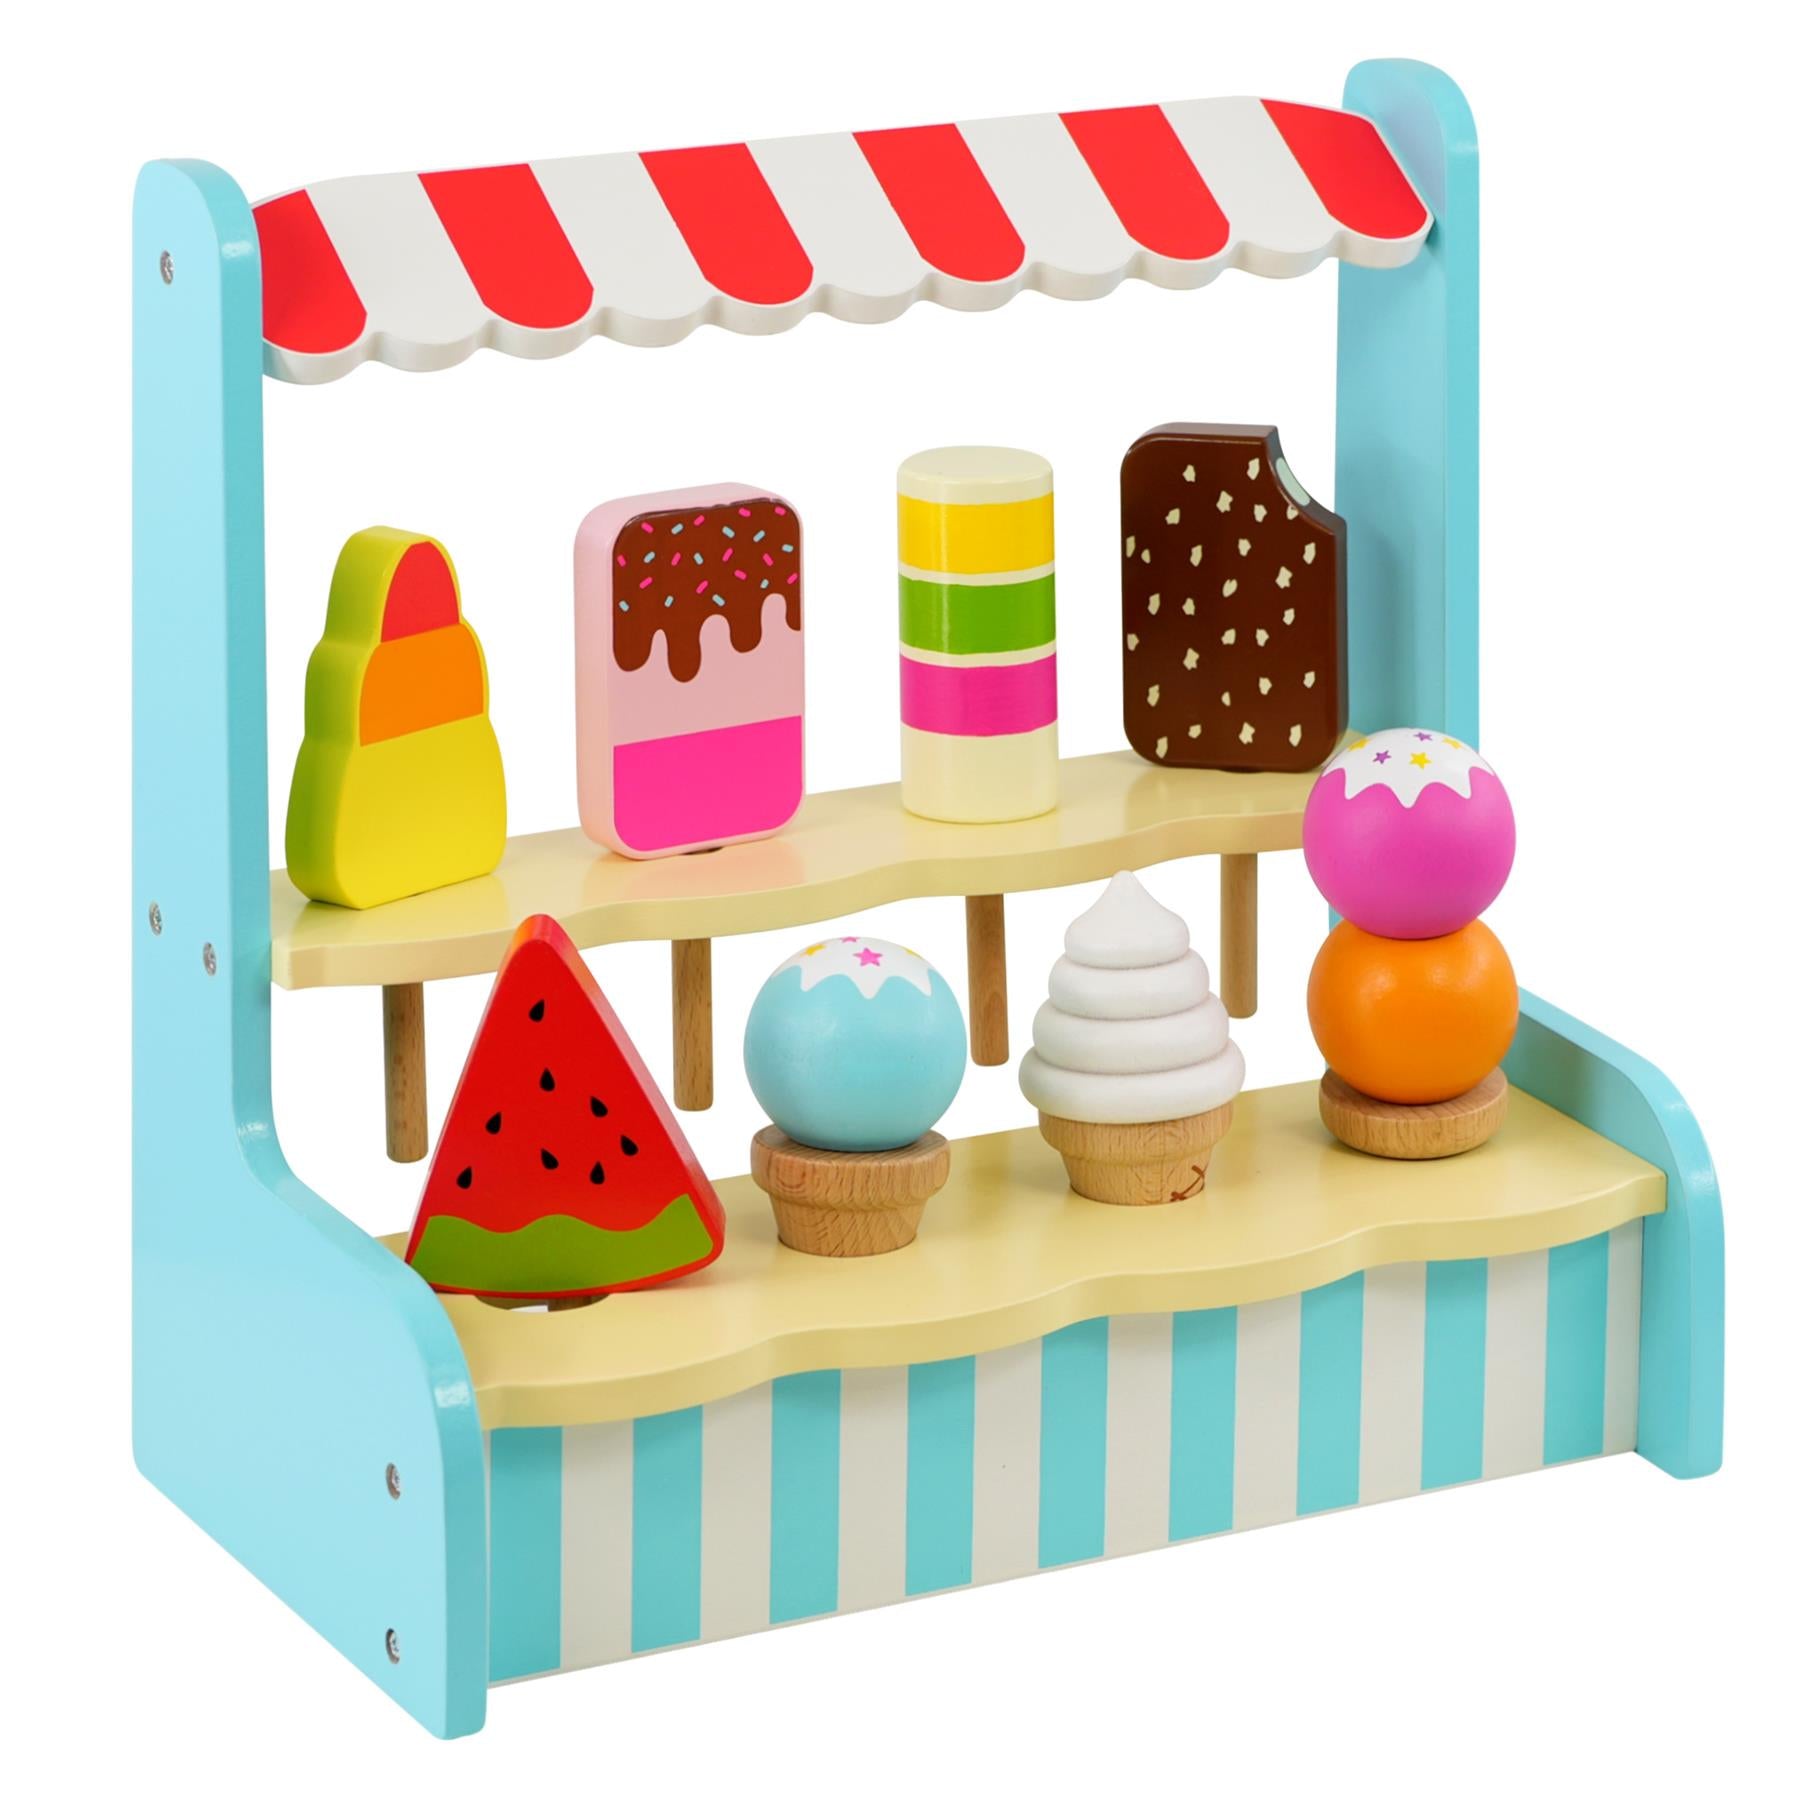 Wooden Ice Cream Shop Stand Playset by The Magic Toy Shop - The Magic Toy Shop